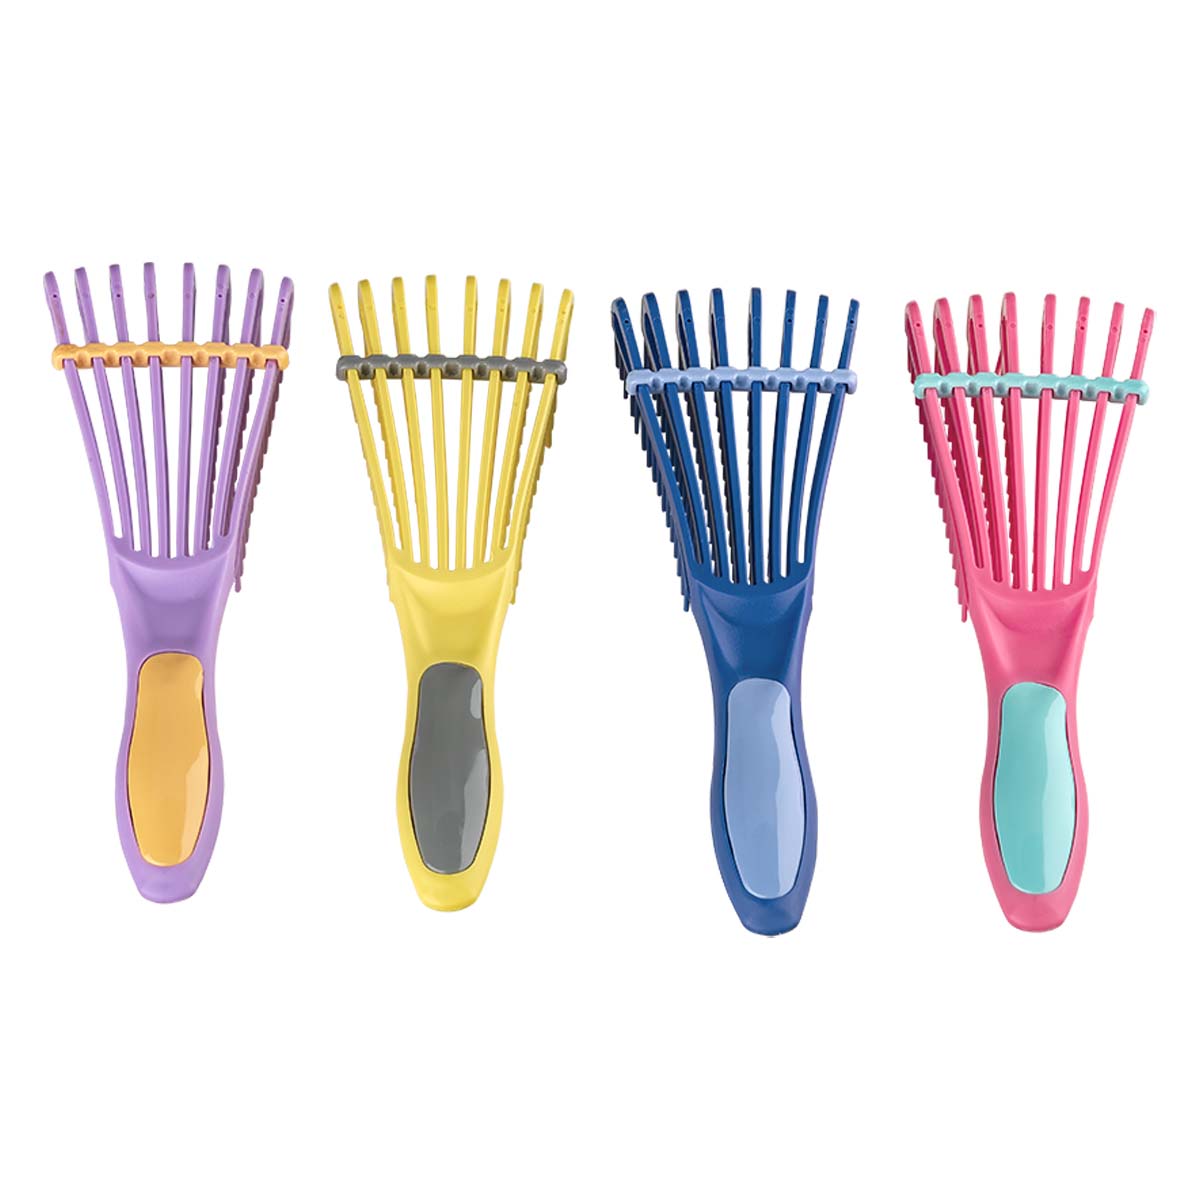 Dompel Caracol hairbrush, specially developed for the curl brushing routine, antistatic brush with light, soft and flexible bristles. 4 pieces (yellow, pink, purple, blue) - depilcompany